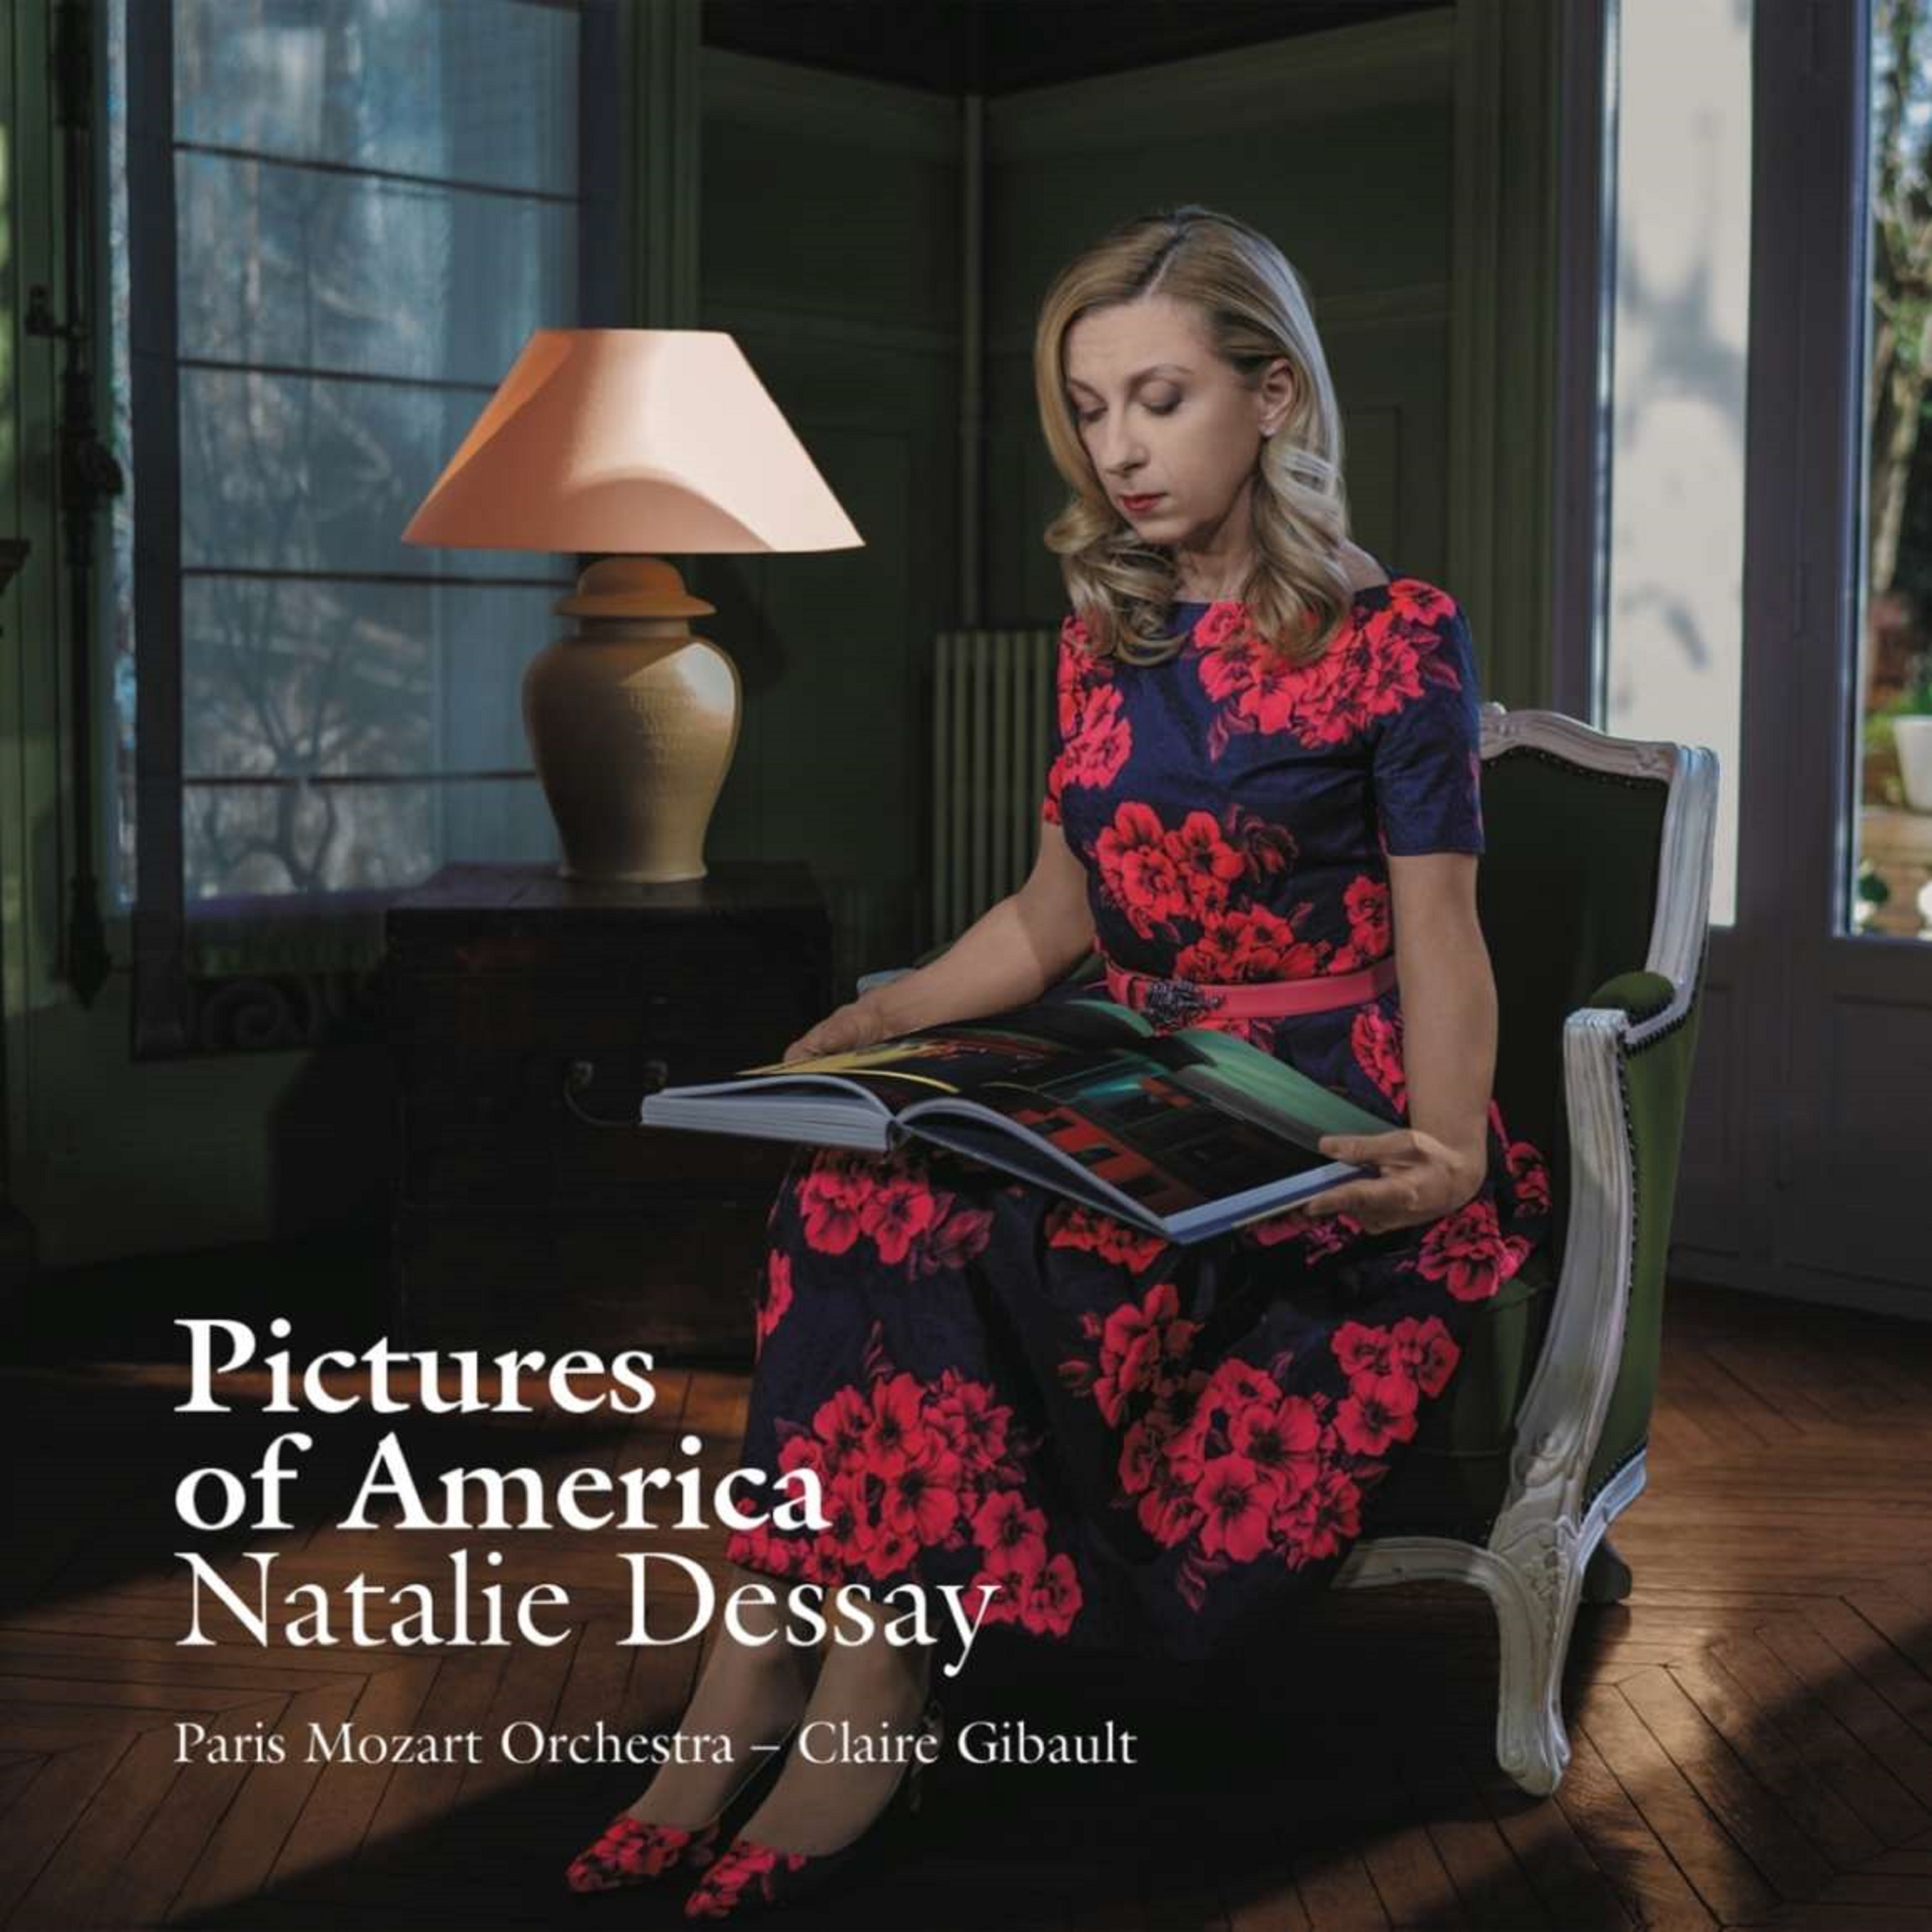 Pictures of America | Natalie Dessay